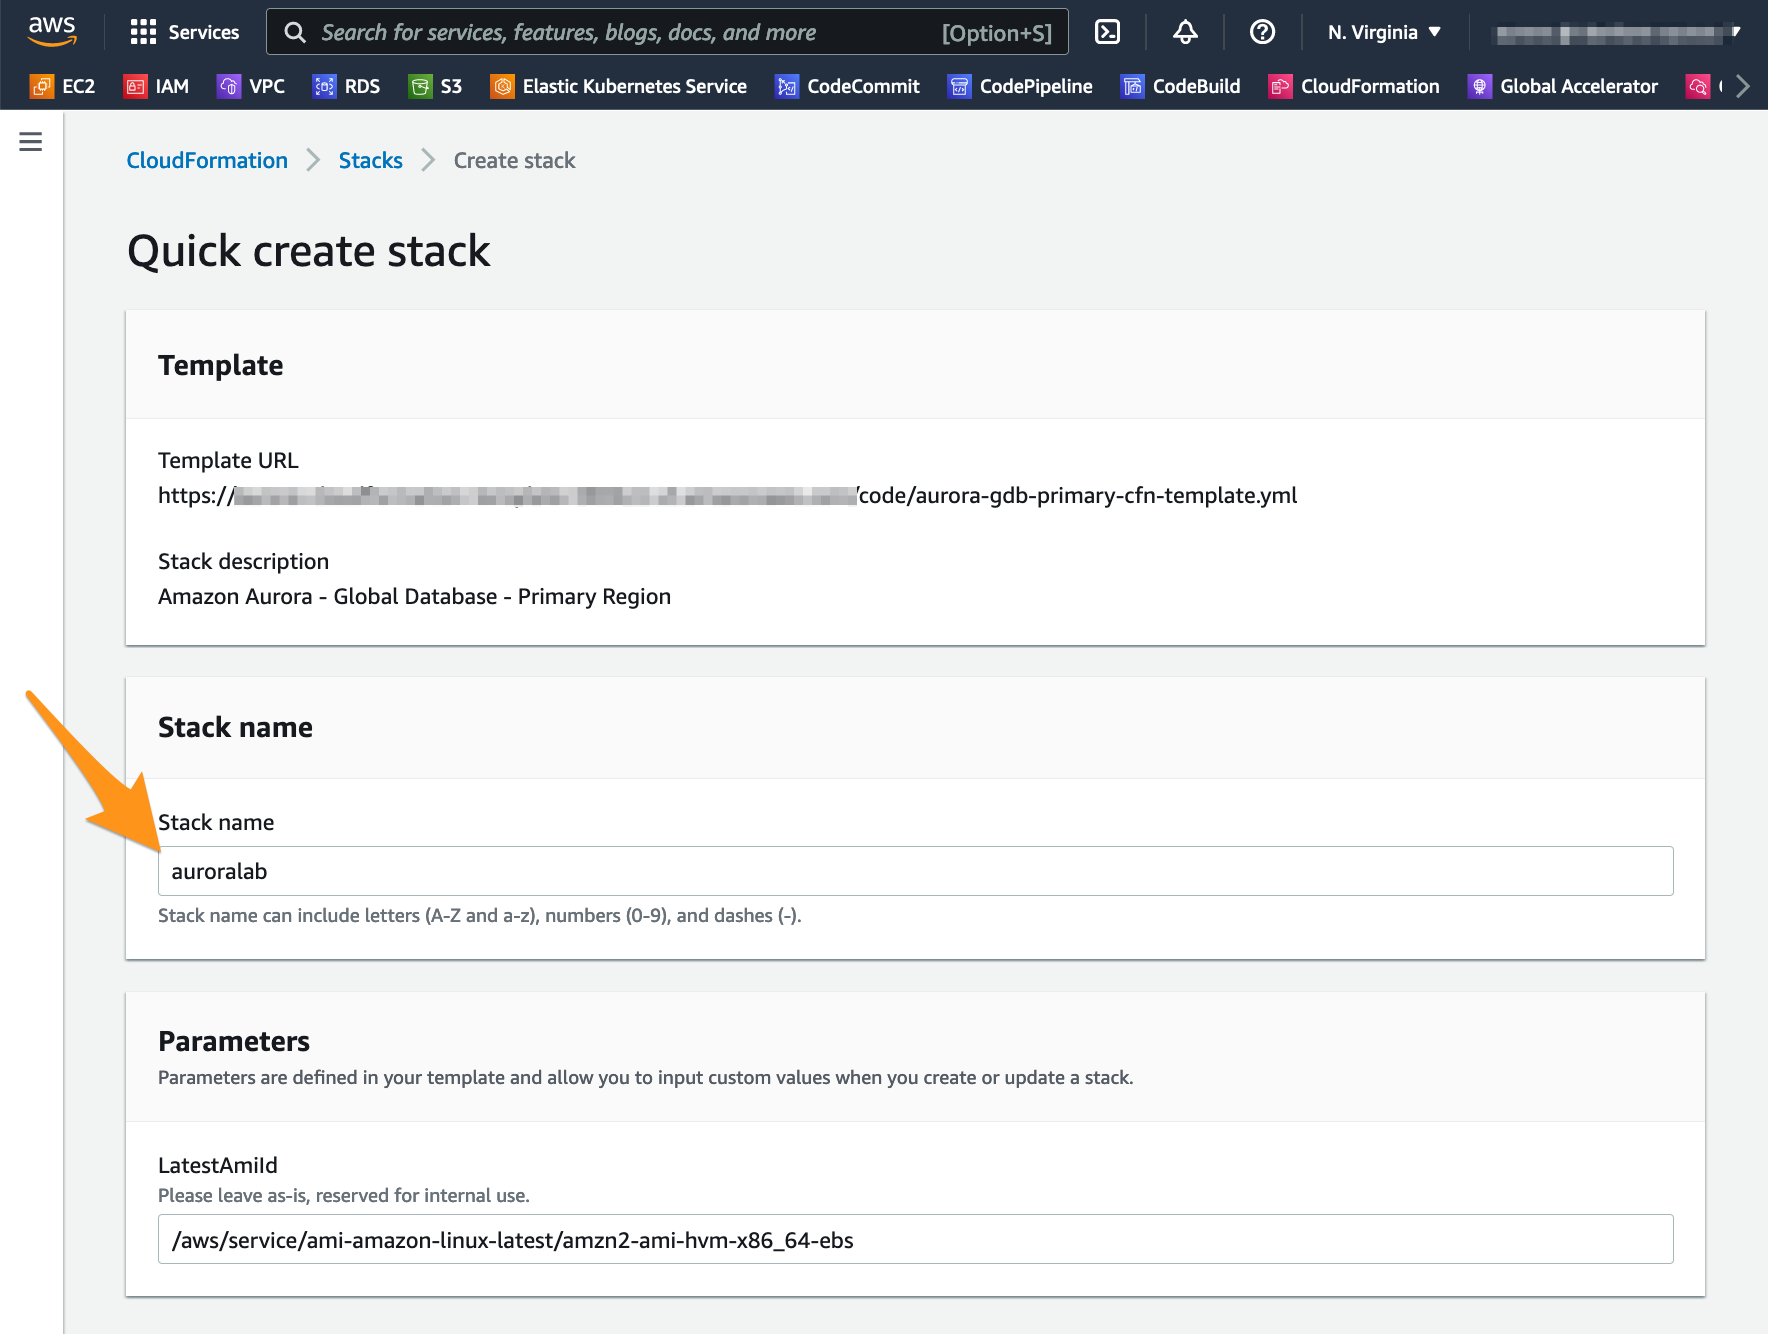 Create Stack